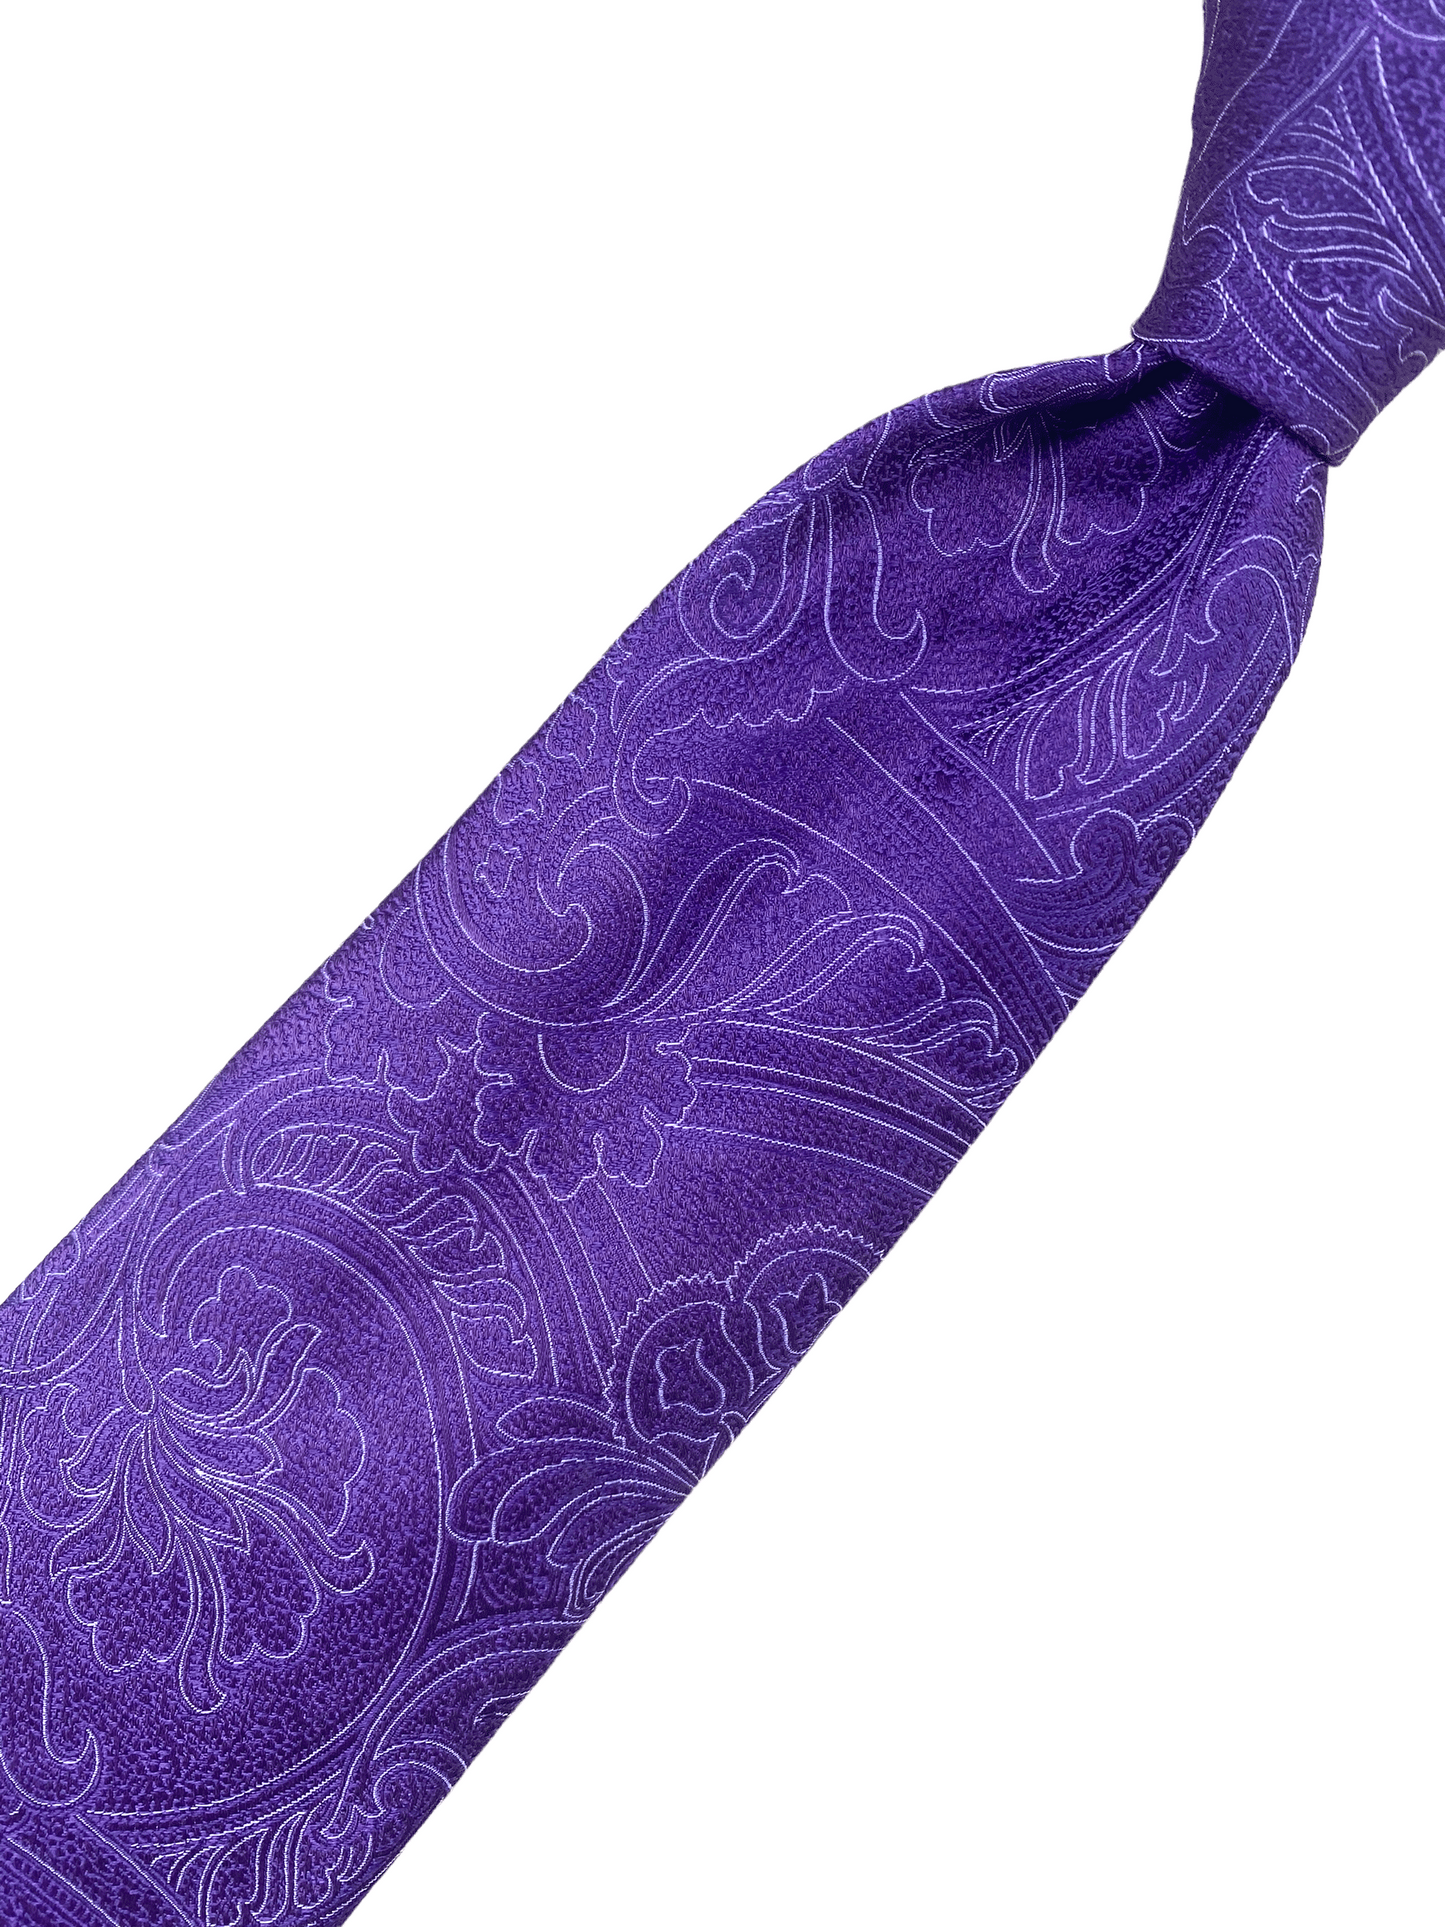 Canali Purple Paisley Silk Tie - Genuine Design luxury consignment Calgary, Alberta, Canada New & pre-owned clothing, shoes, accessories.